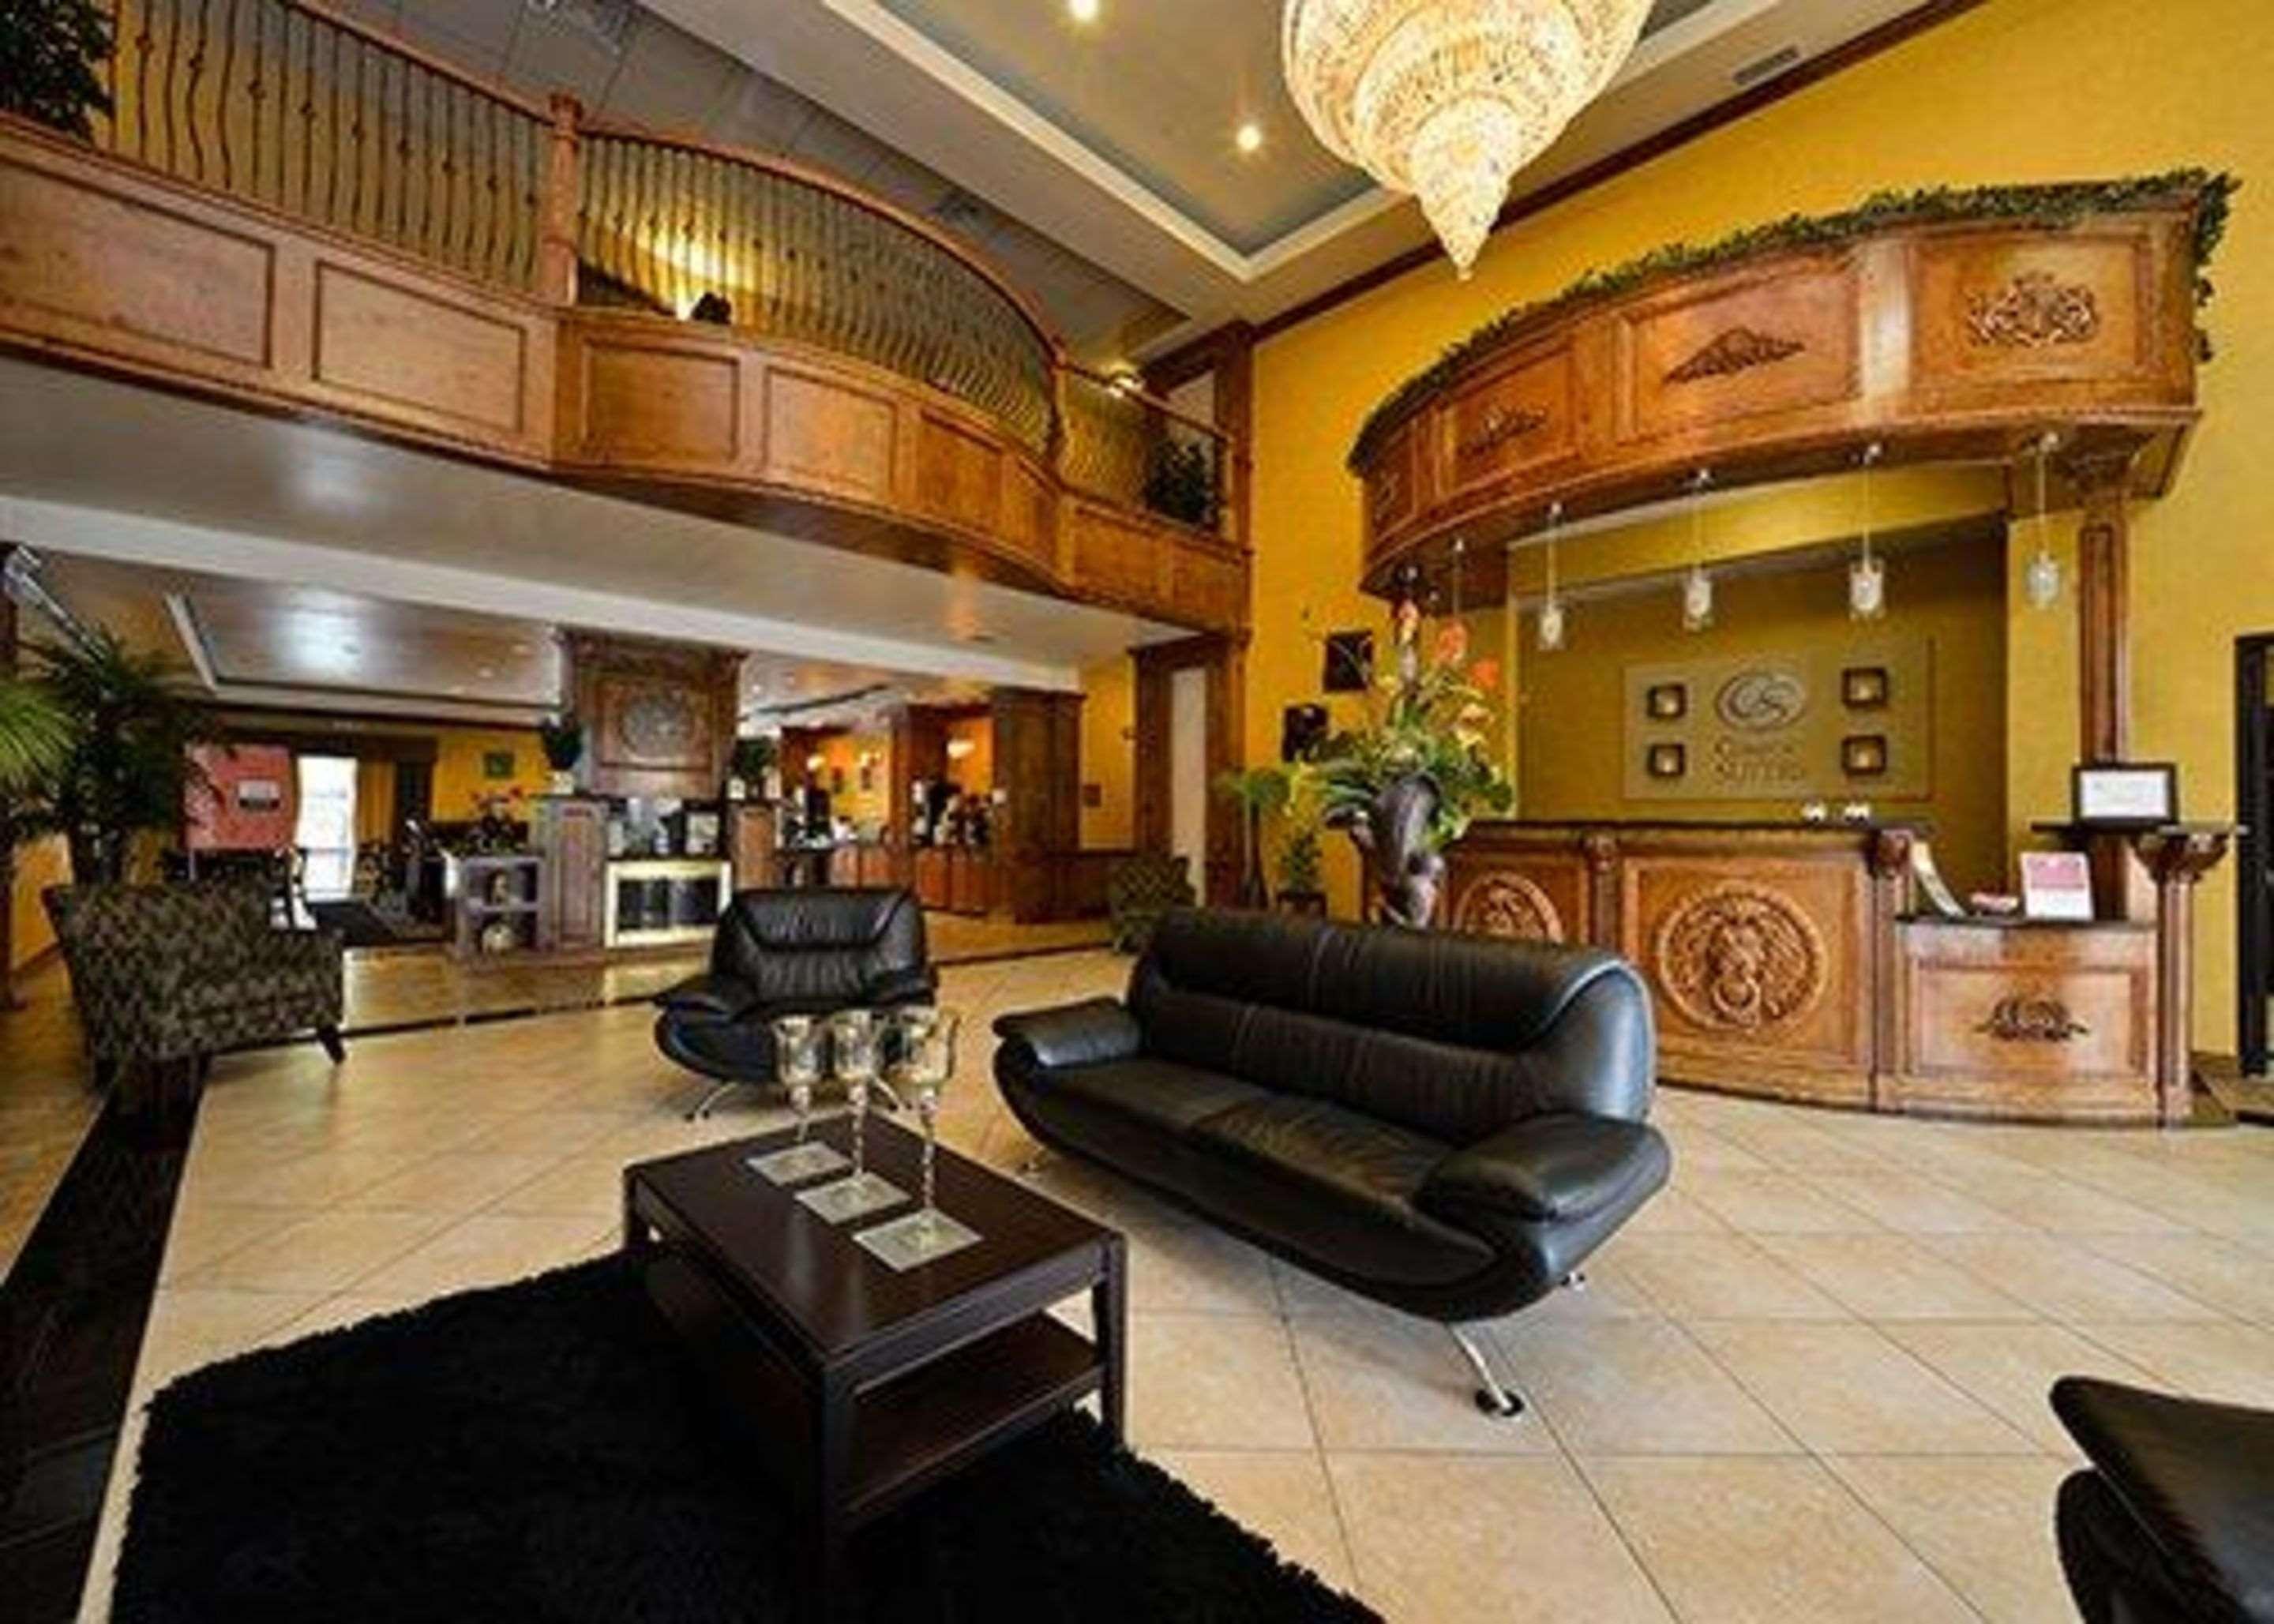 16 Best Hotels in Hollister, California. Hotels from $102/night - KAYAK